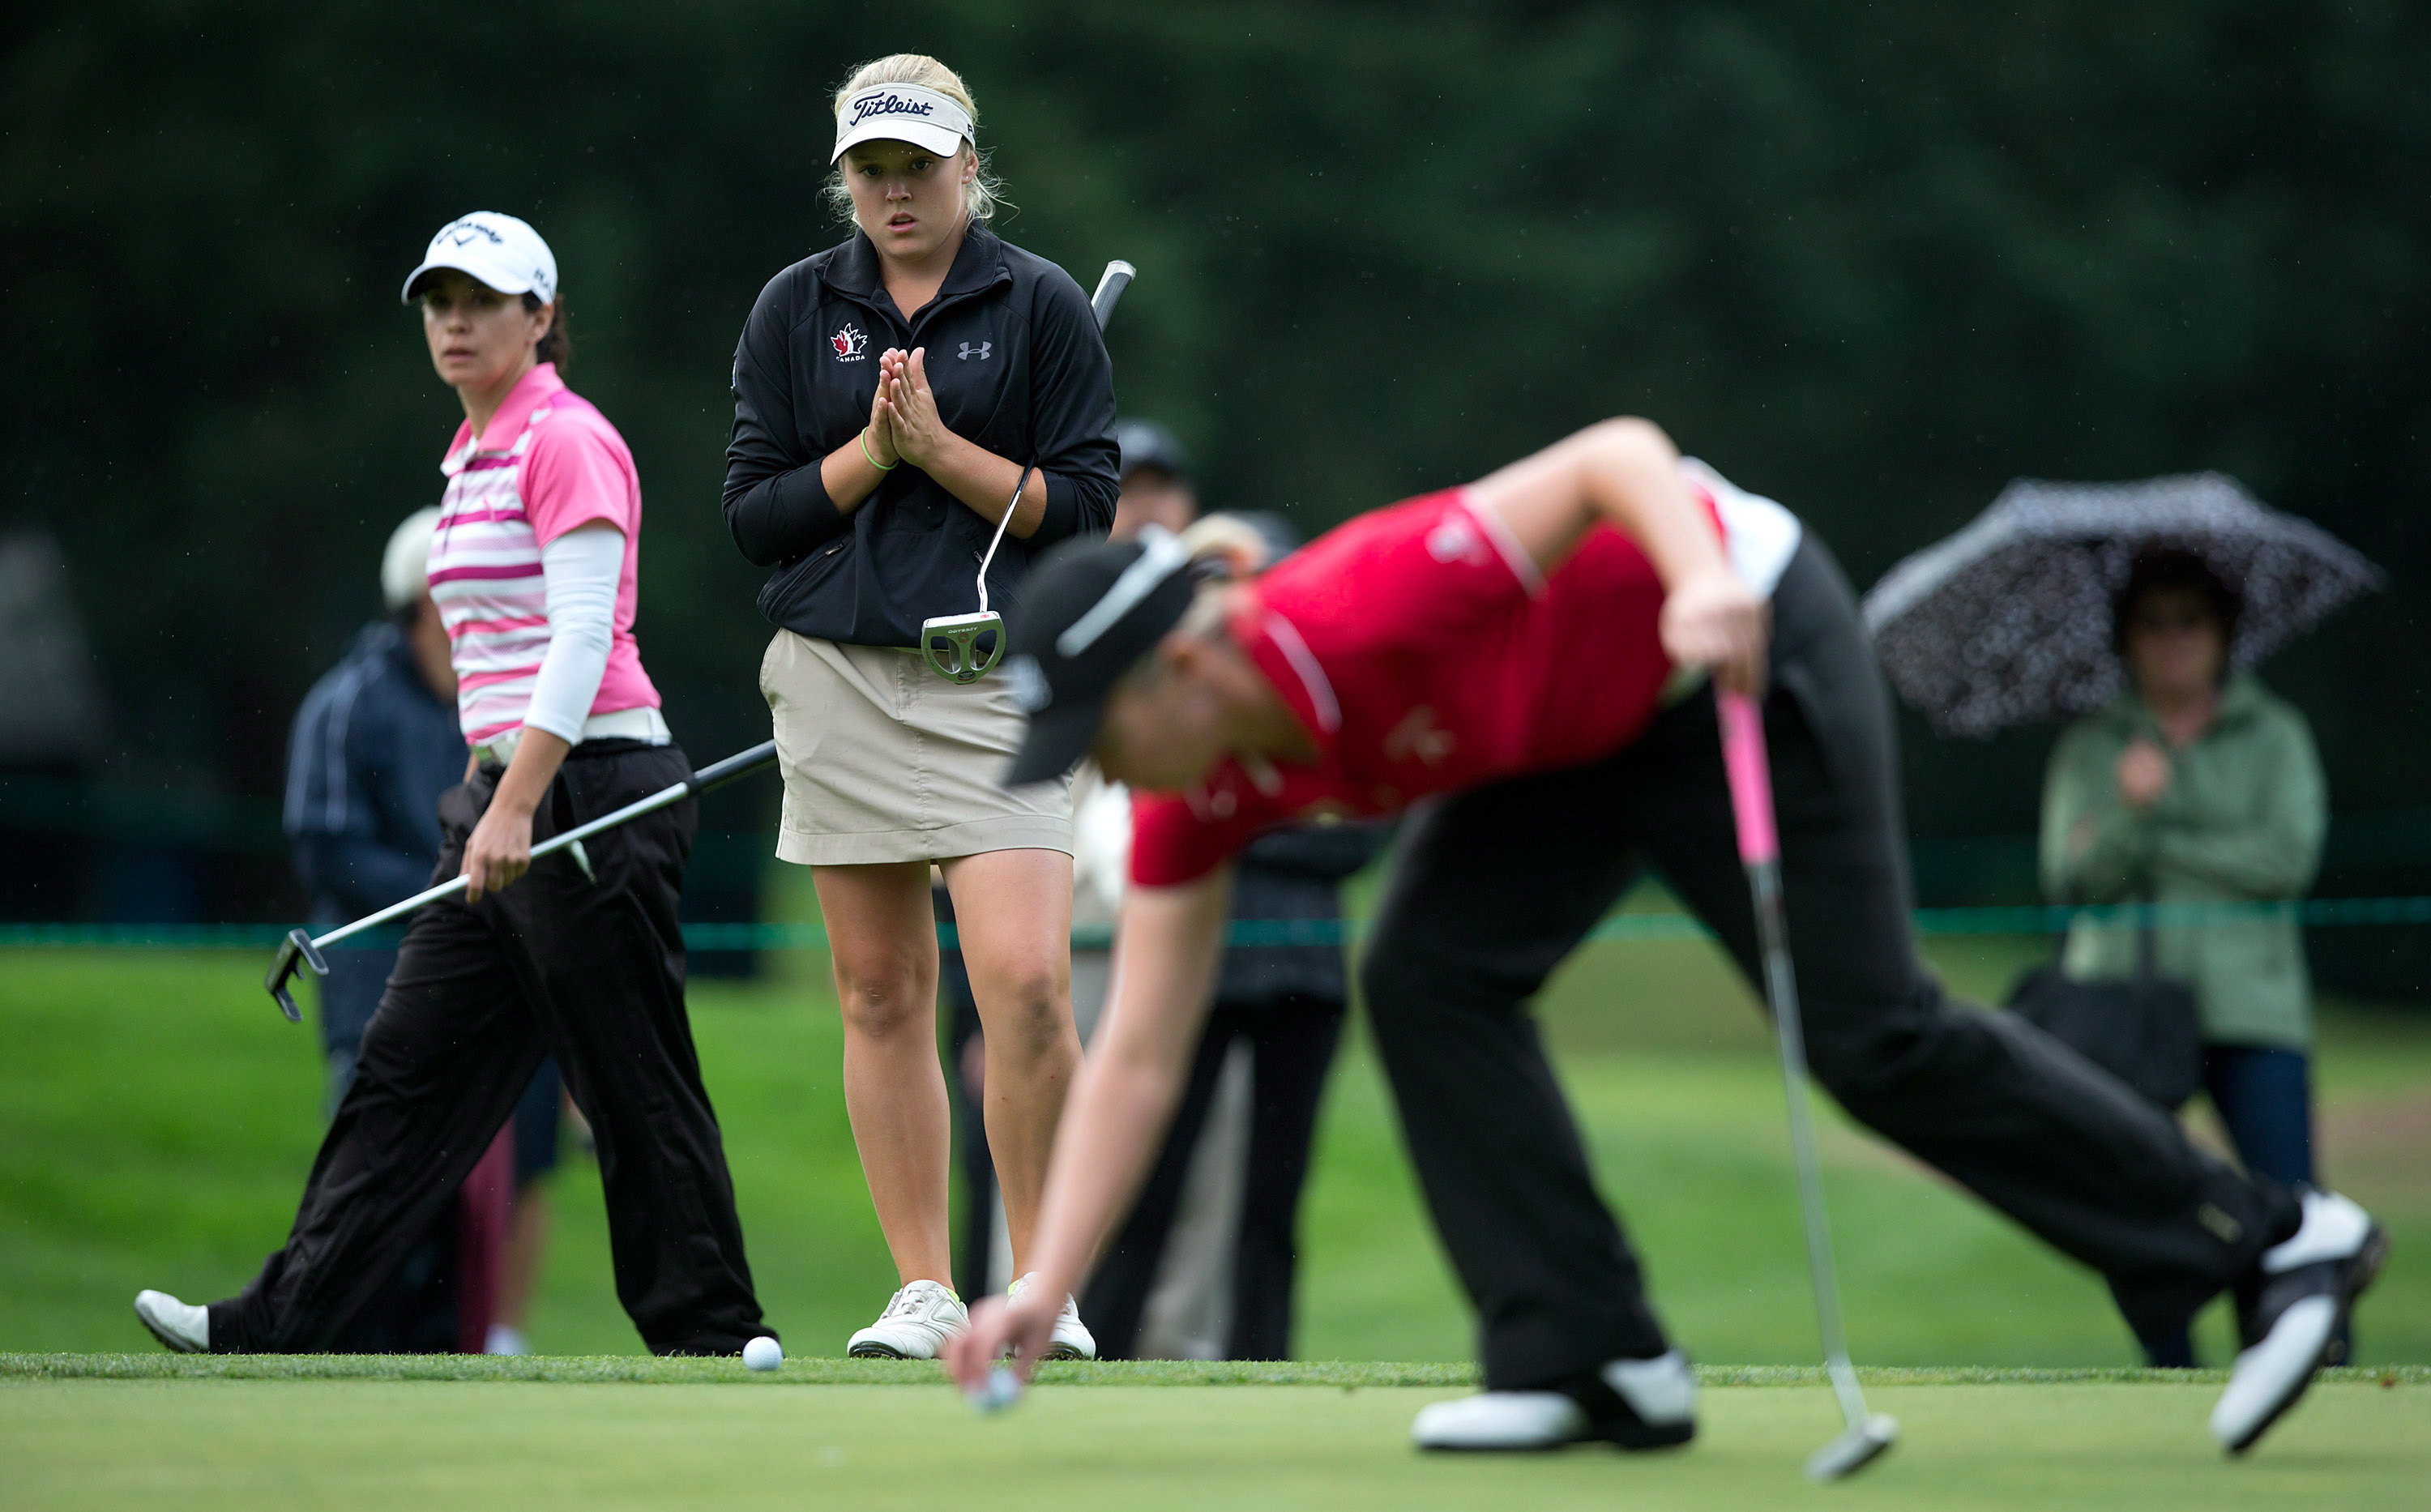 Fourteen-year-old Brooke Henderson, second left, of Smiths Falls, Ont., waits to putt on the 17th hole as Alena Sharp, right, of Hamilton, Ont., places her ball and Mo Martin, left, of Altadena, Calif., looks on during the first round of the CN Canadian Women's Open LPGA golf tournament at the Vancouver Golf Club in Coquitlam, B.C., on Thursday August 23, 2012. THE CANADIAN PRESS/Darryl Dyck